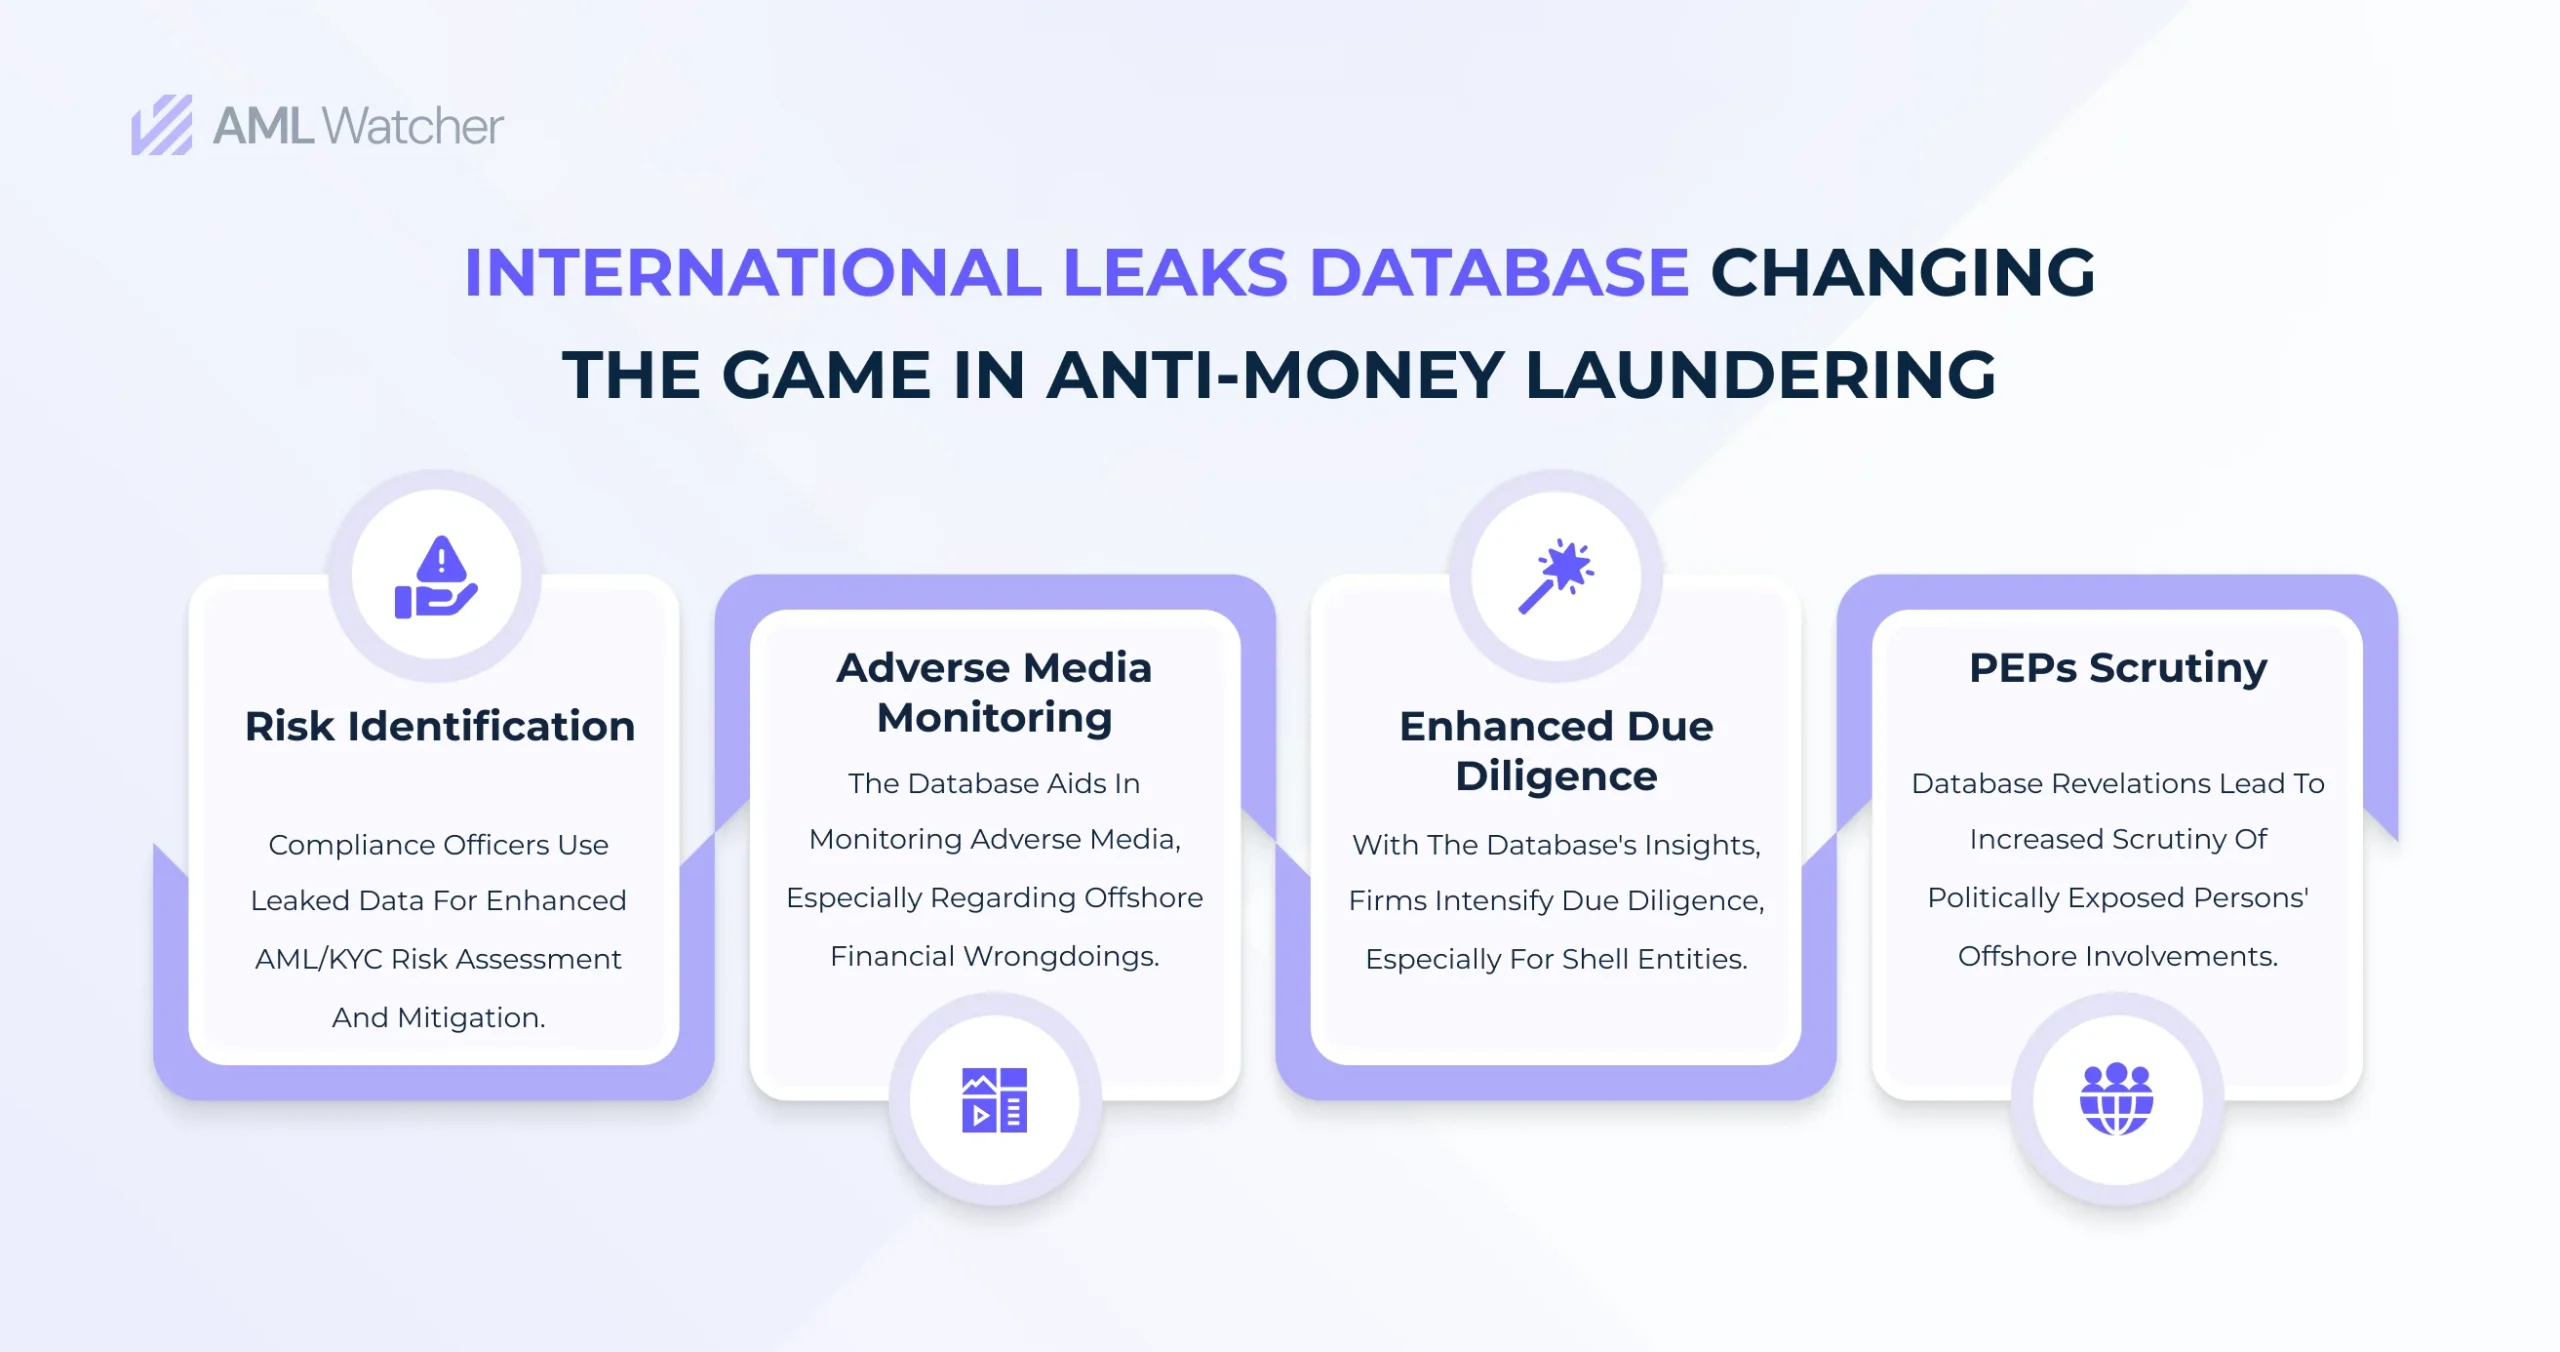  Leveraging leaked data for AML/KYC, media watch, due diligence, and political scrutiny. 